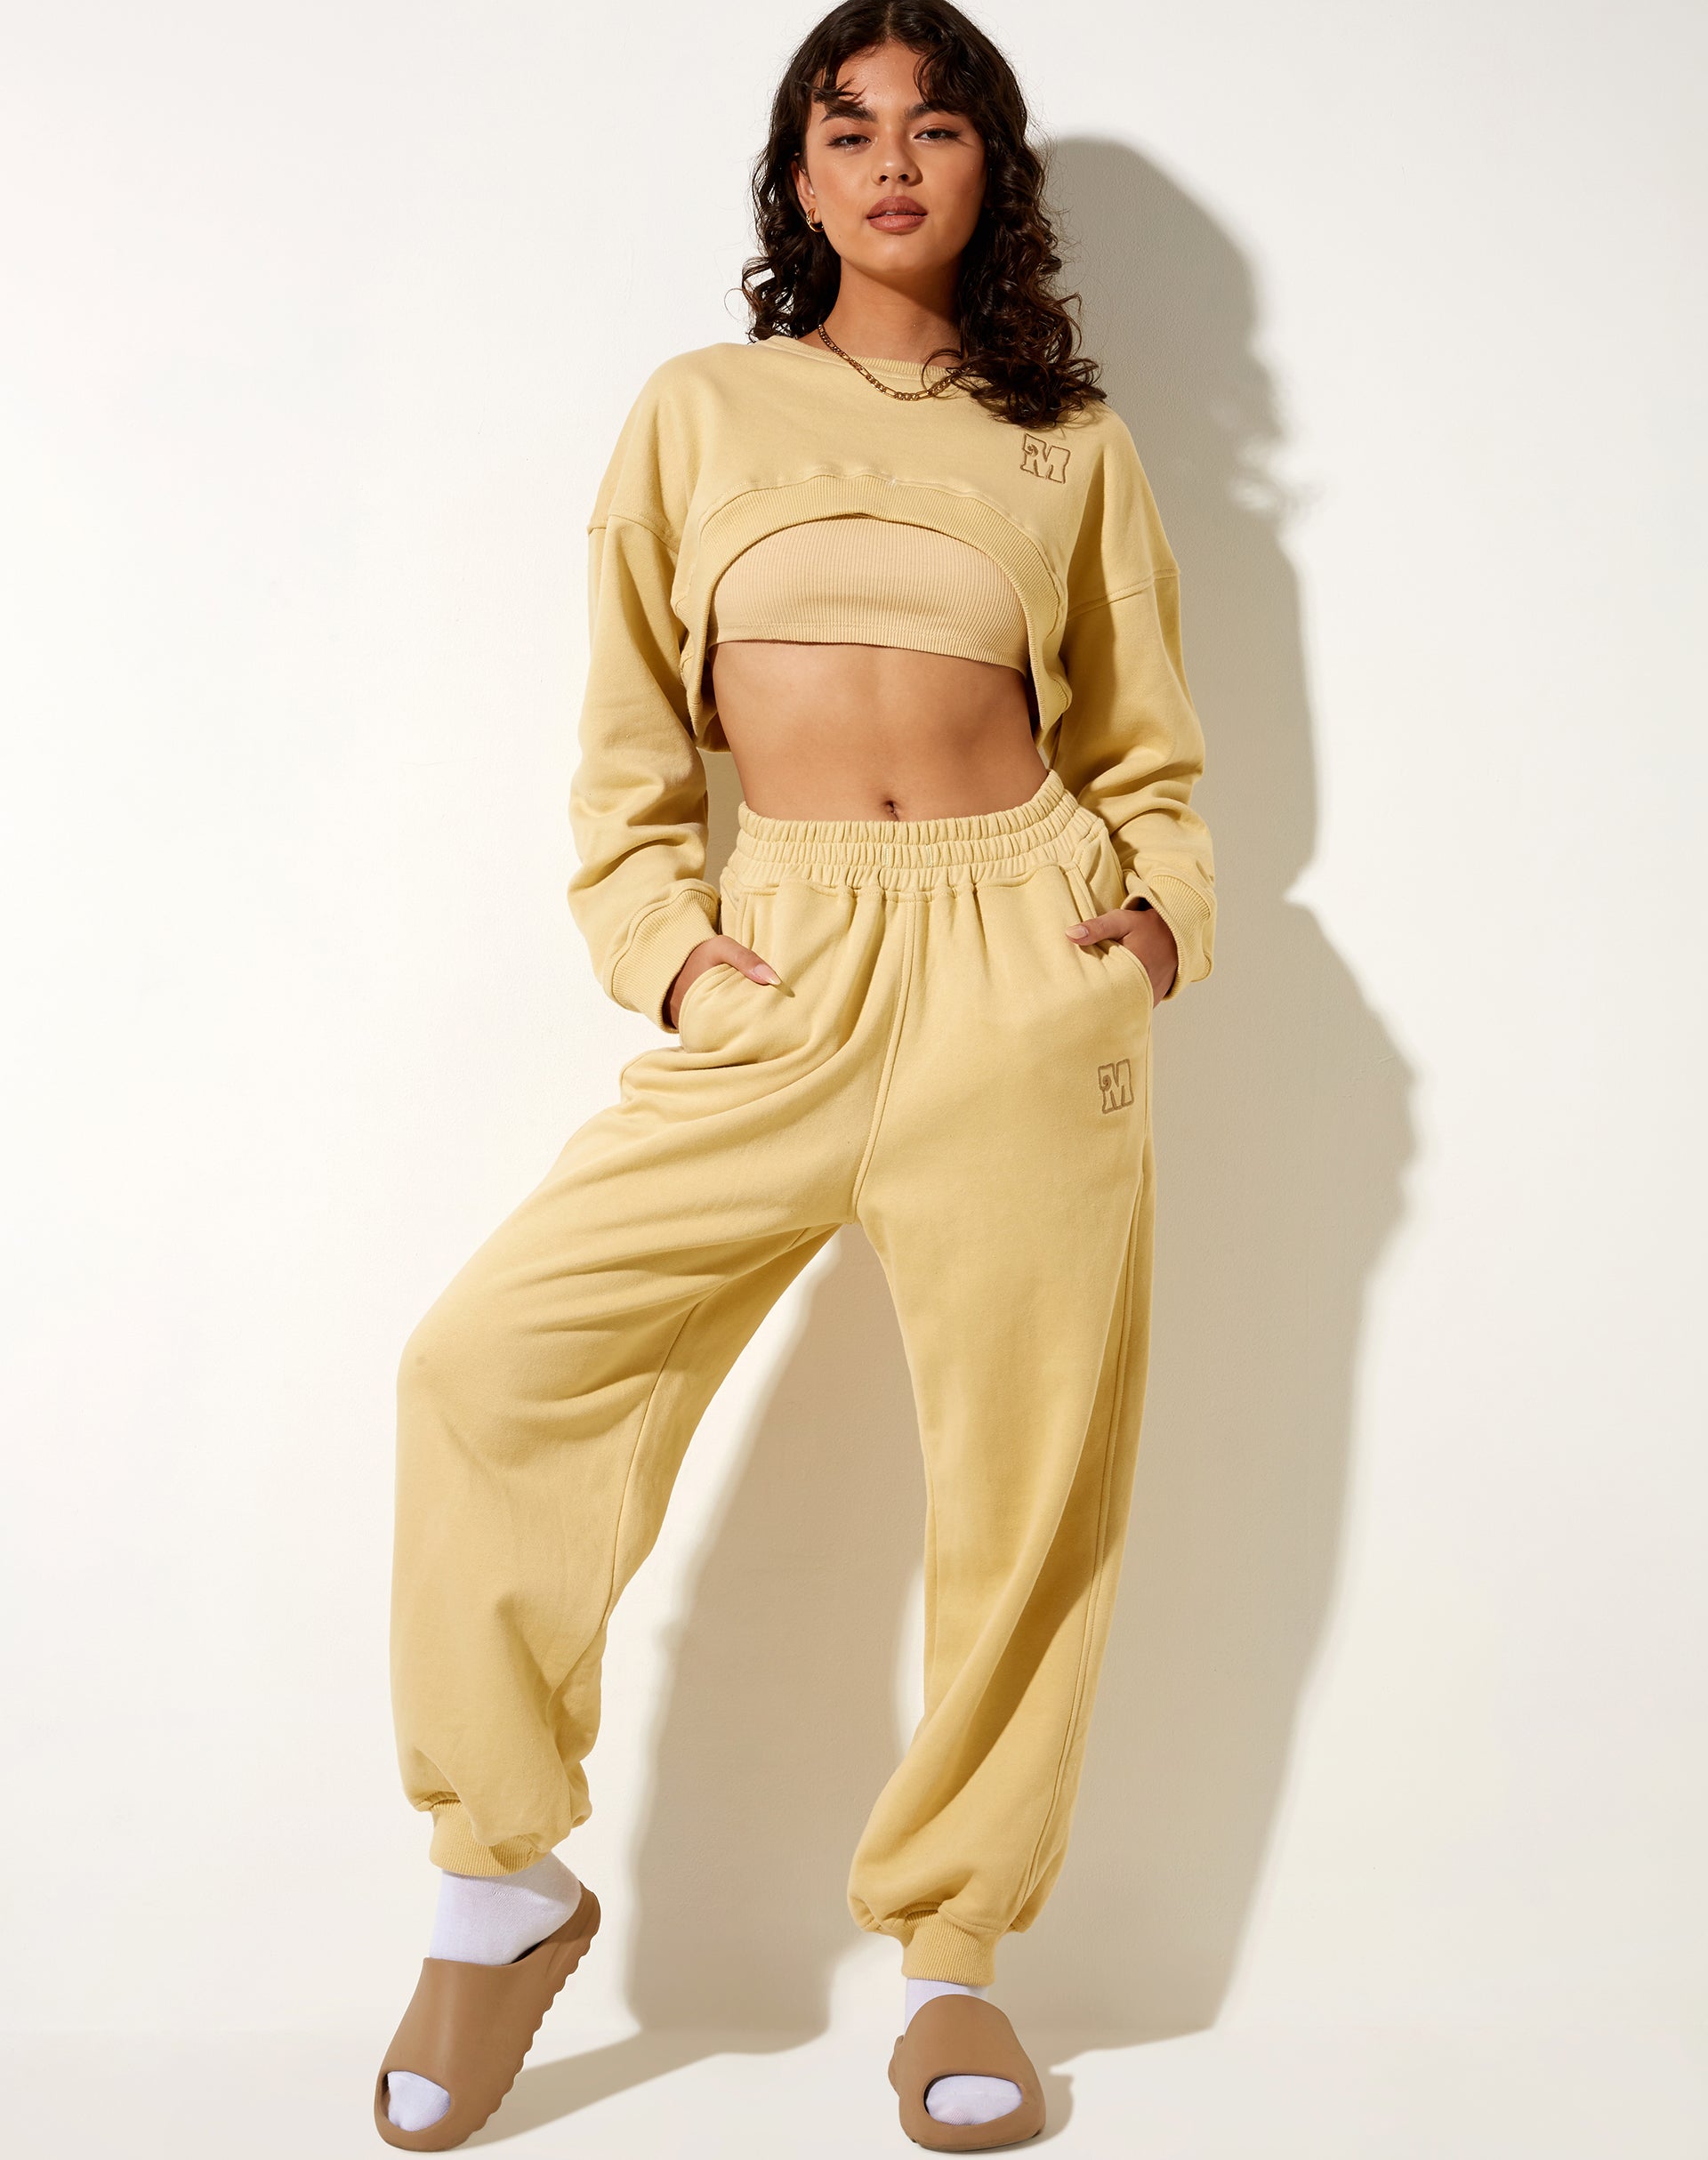 Cropped joggers in mustard jersey on fleece - 10625 999₴ 【MustHave ❤】